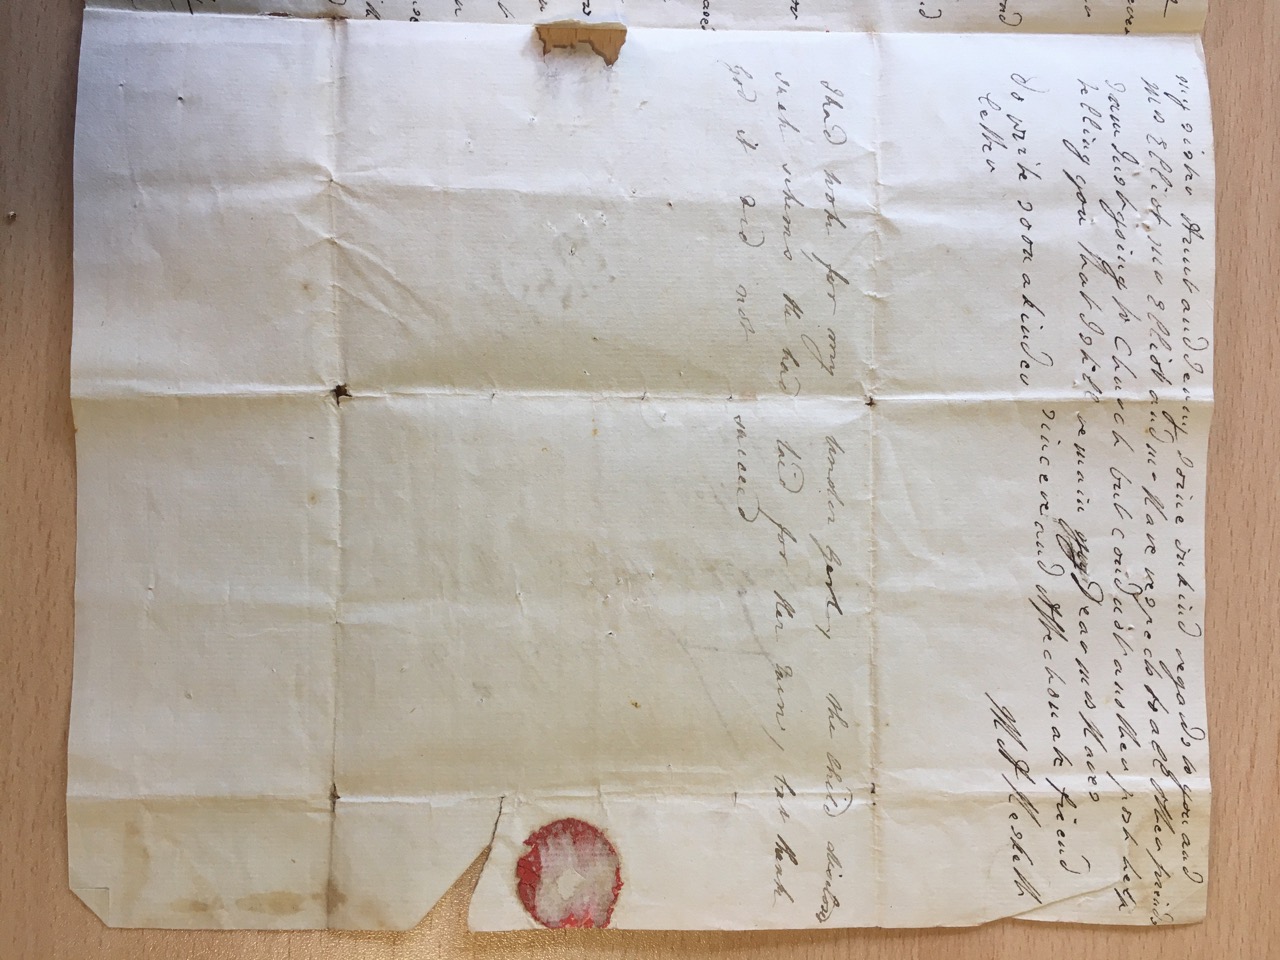 Image #3 of letter: Mary Ann Hesketh to Ann Hare, 2 May